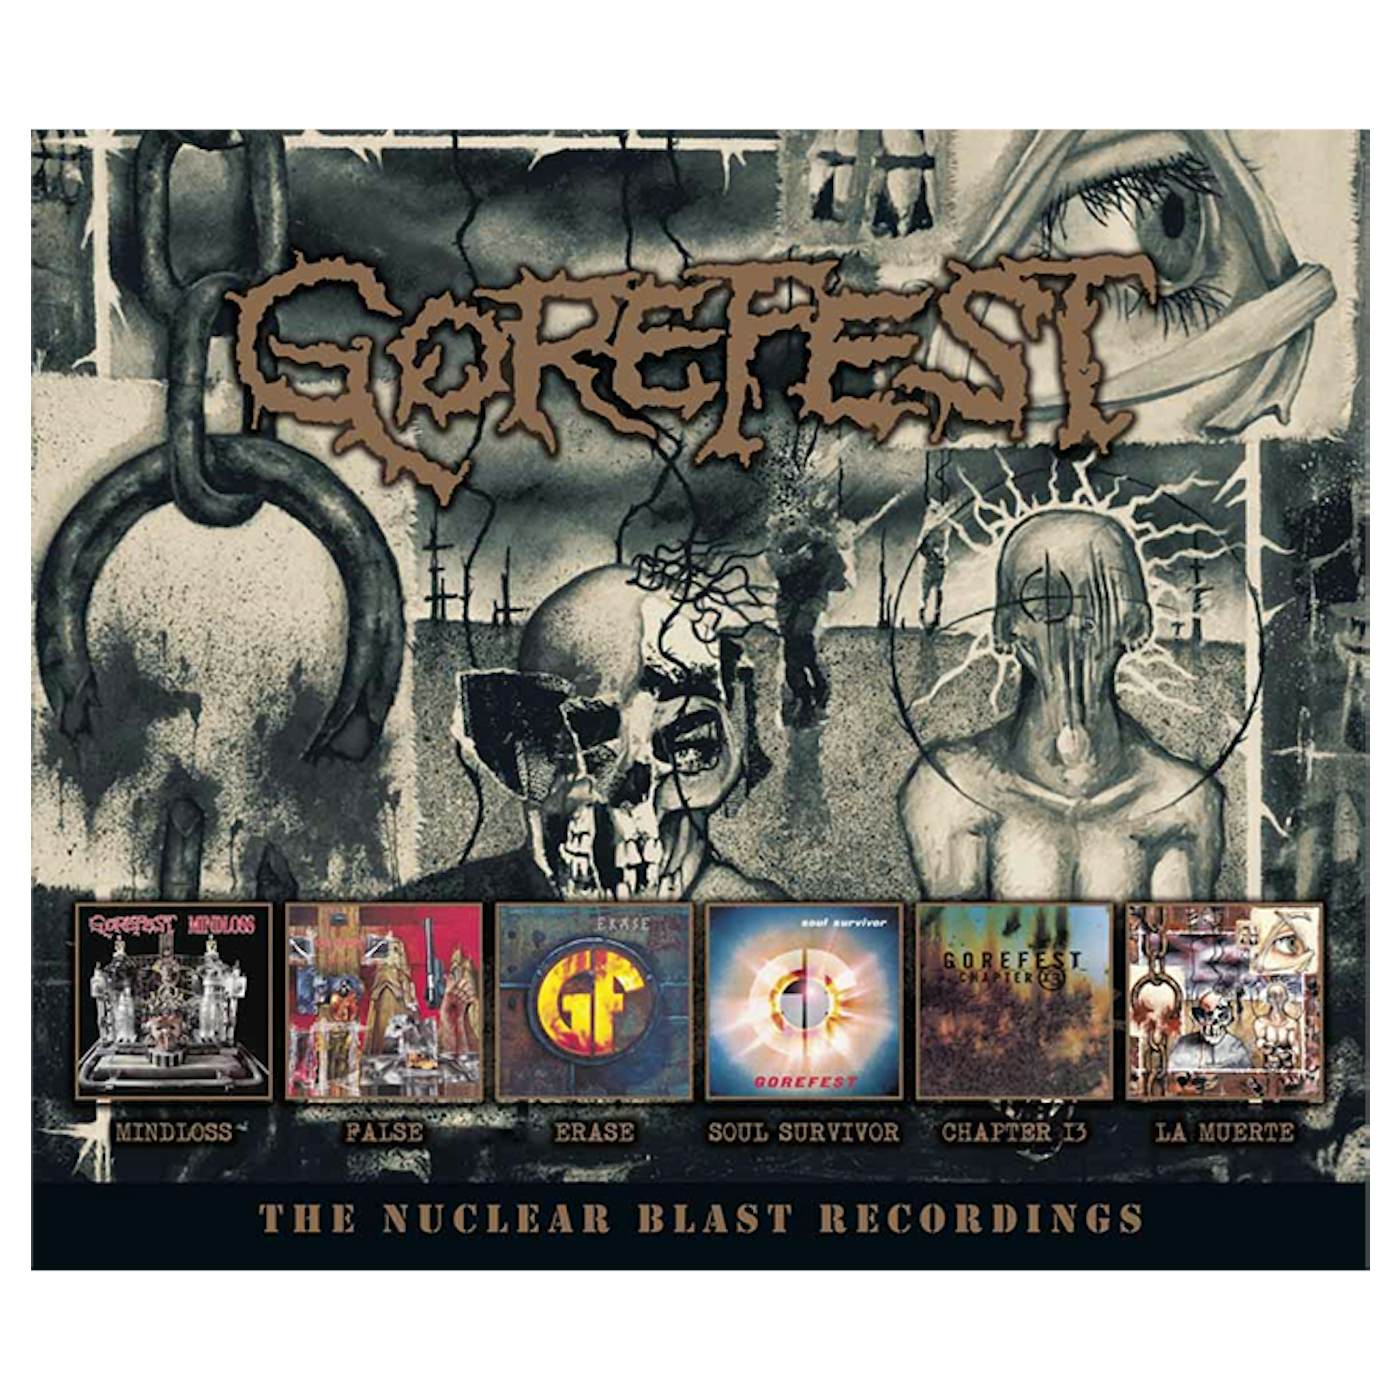 GOREFEST - 'The Nuclear Blast Recordings' 6CD Box